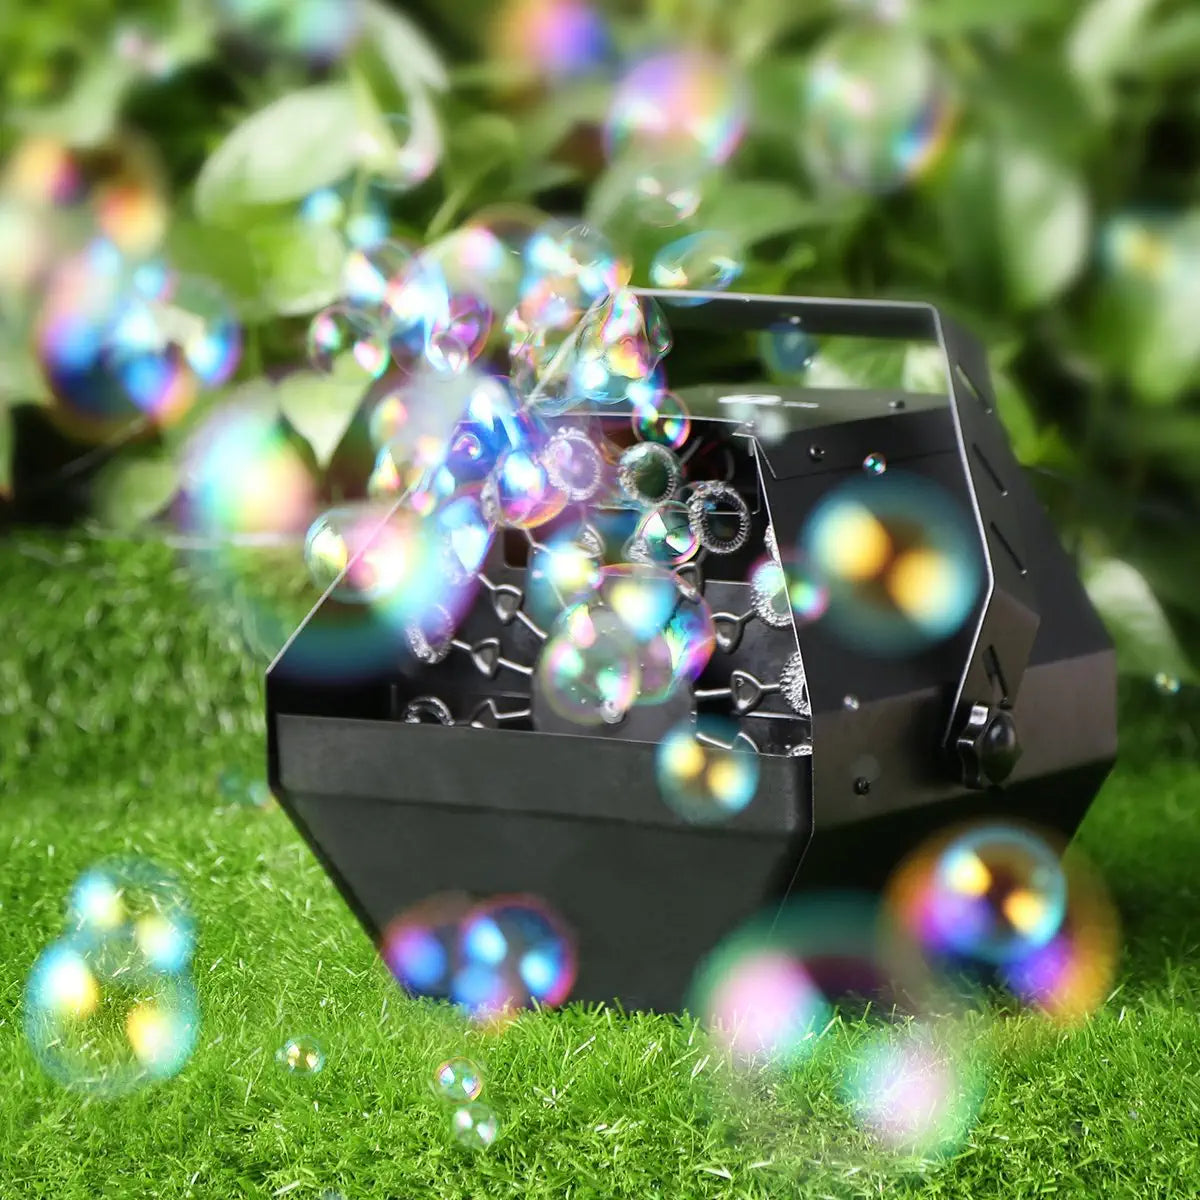 NATURALIFE 1byone Professional Bubble Machine with High Output, Automatic Blowing Mechanism for Outdoor or Indoor Use